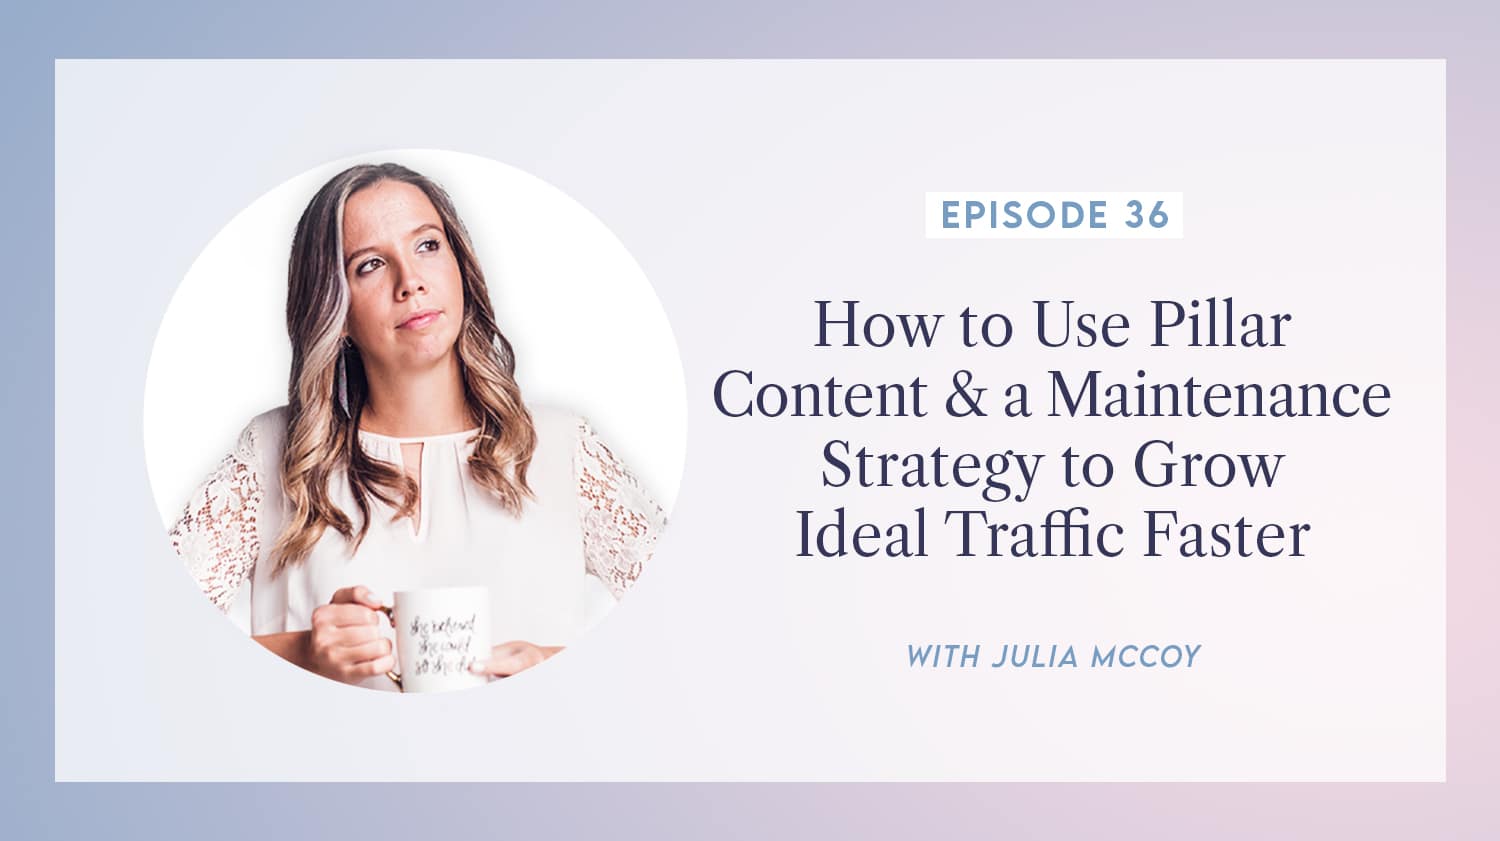 content transformation podcast with julia mccoy episode 36 how to use pillar content & a maintenance strategy to grow ideal traffic faster